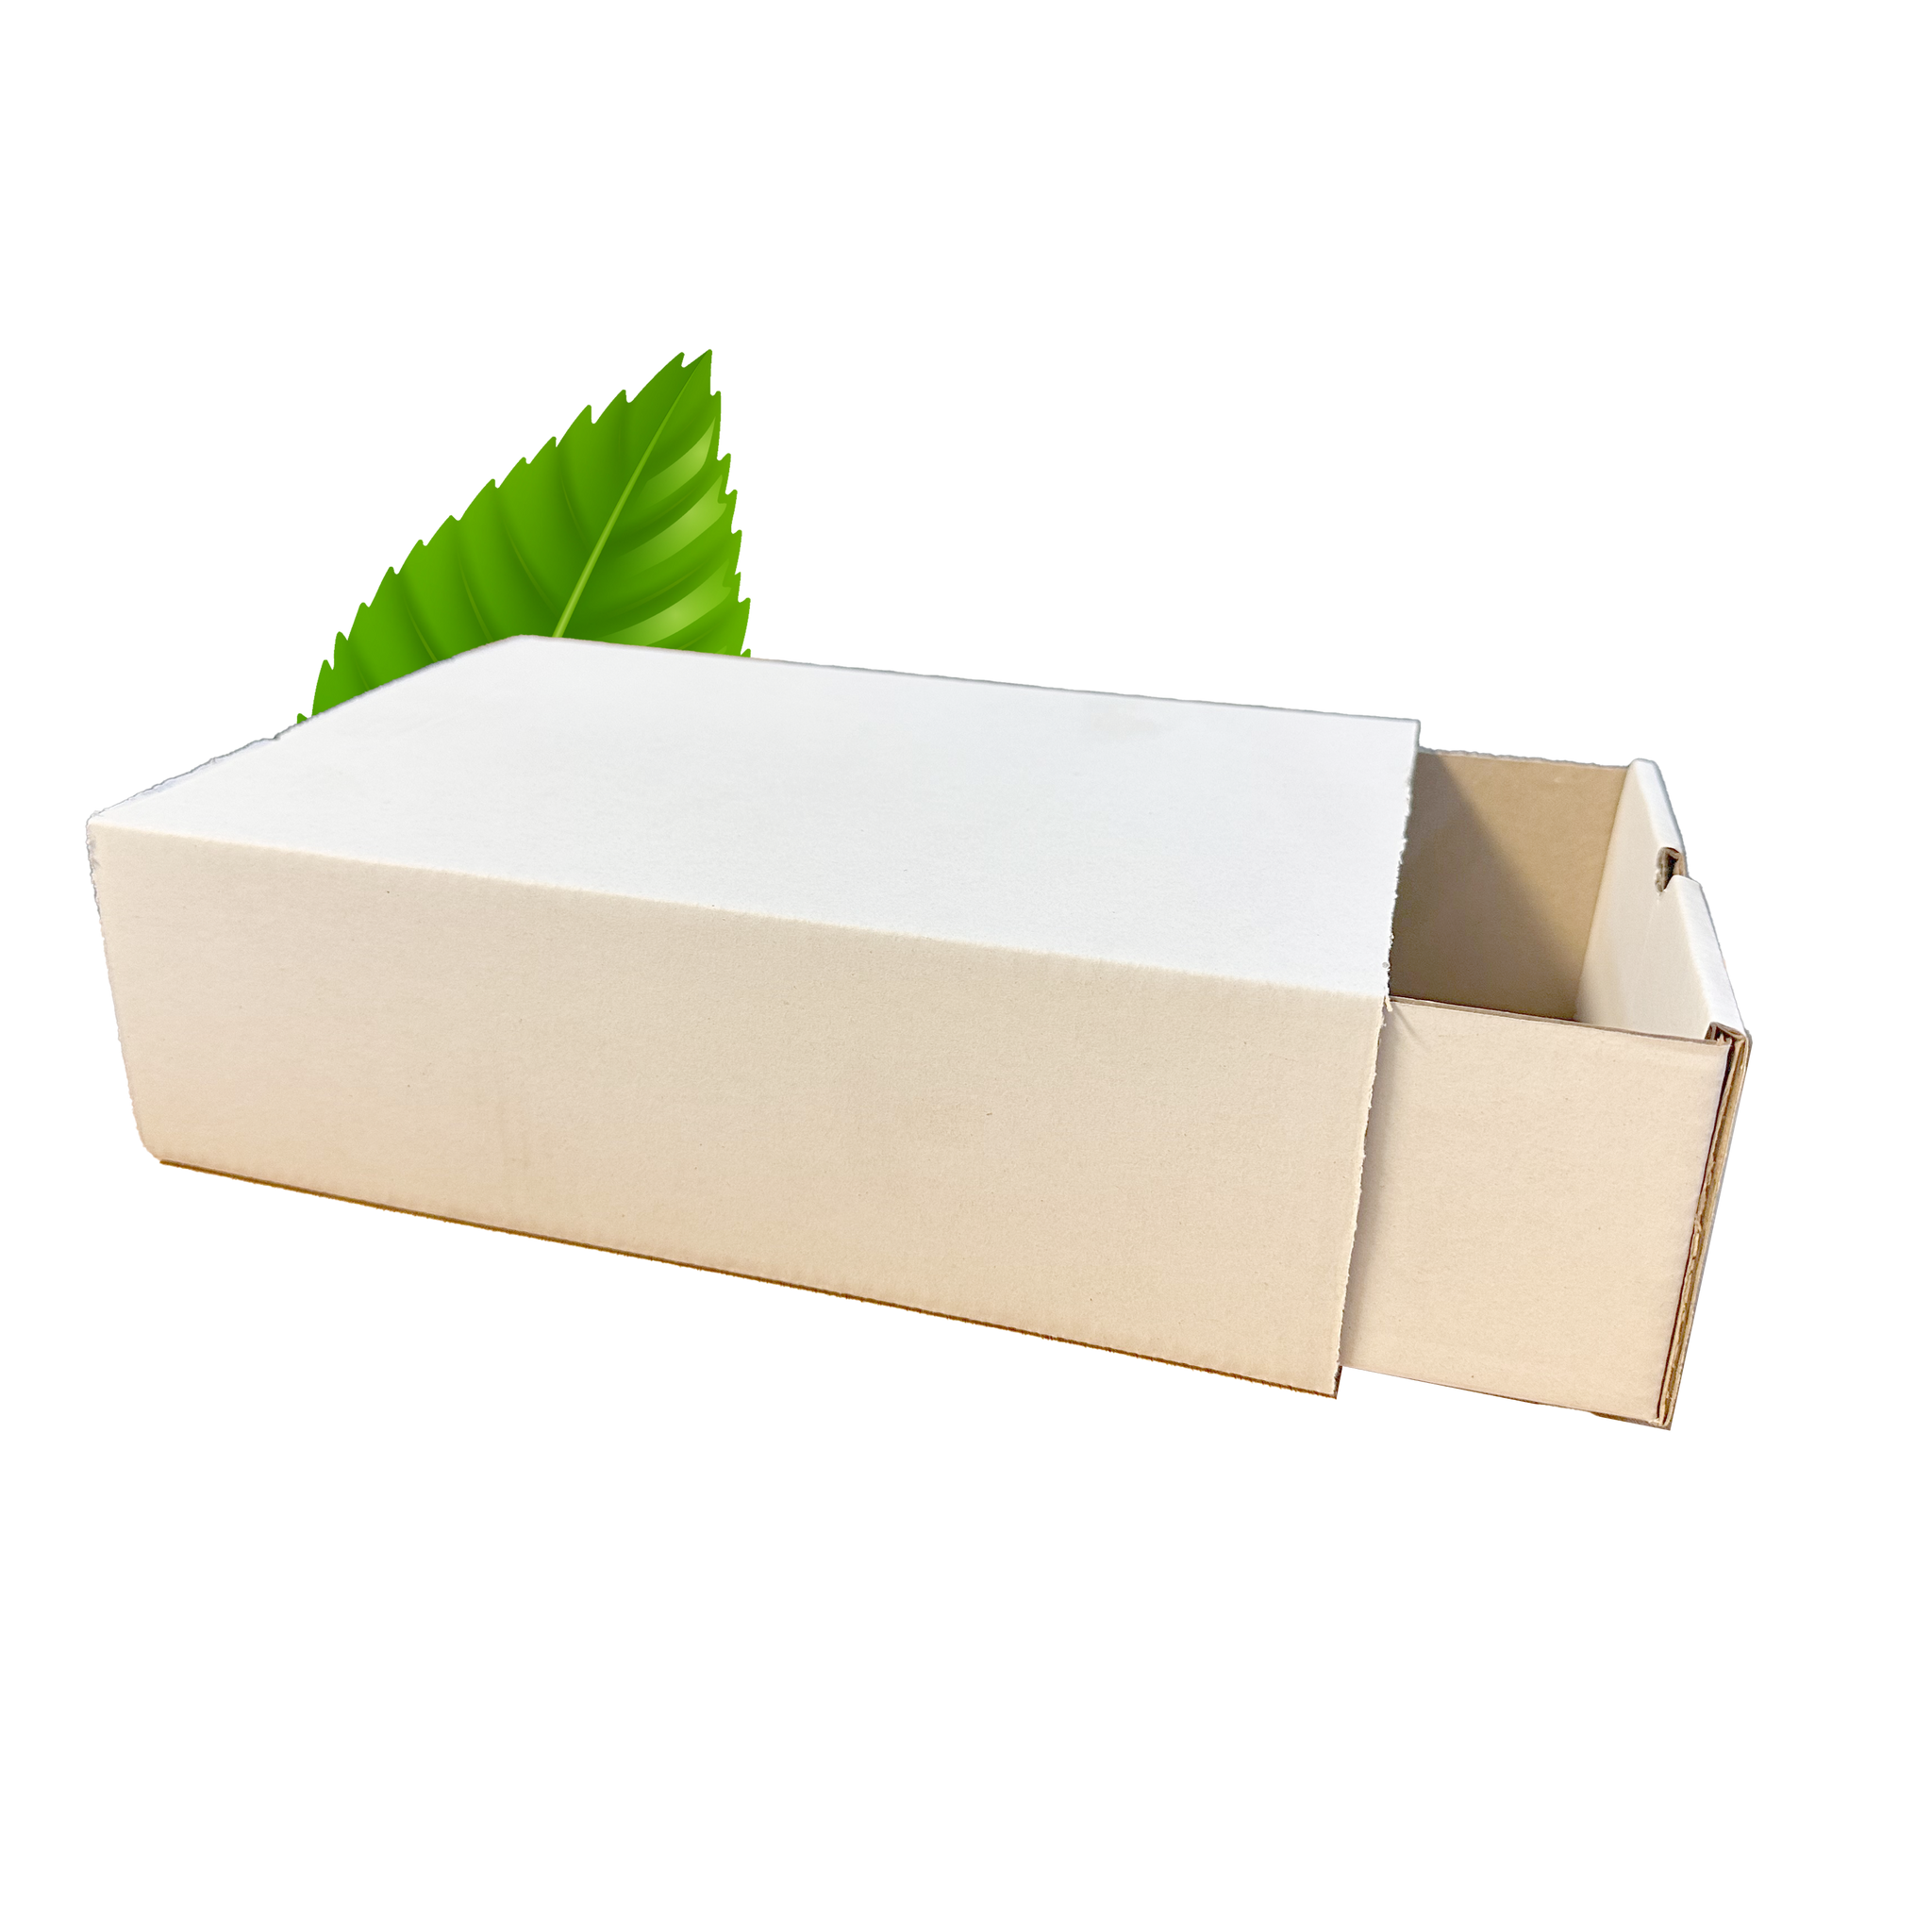 WHITE Sleeve & Base Box - Small - 175x115x75mm (Pack of 10)